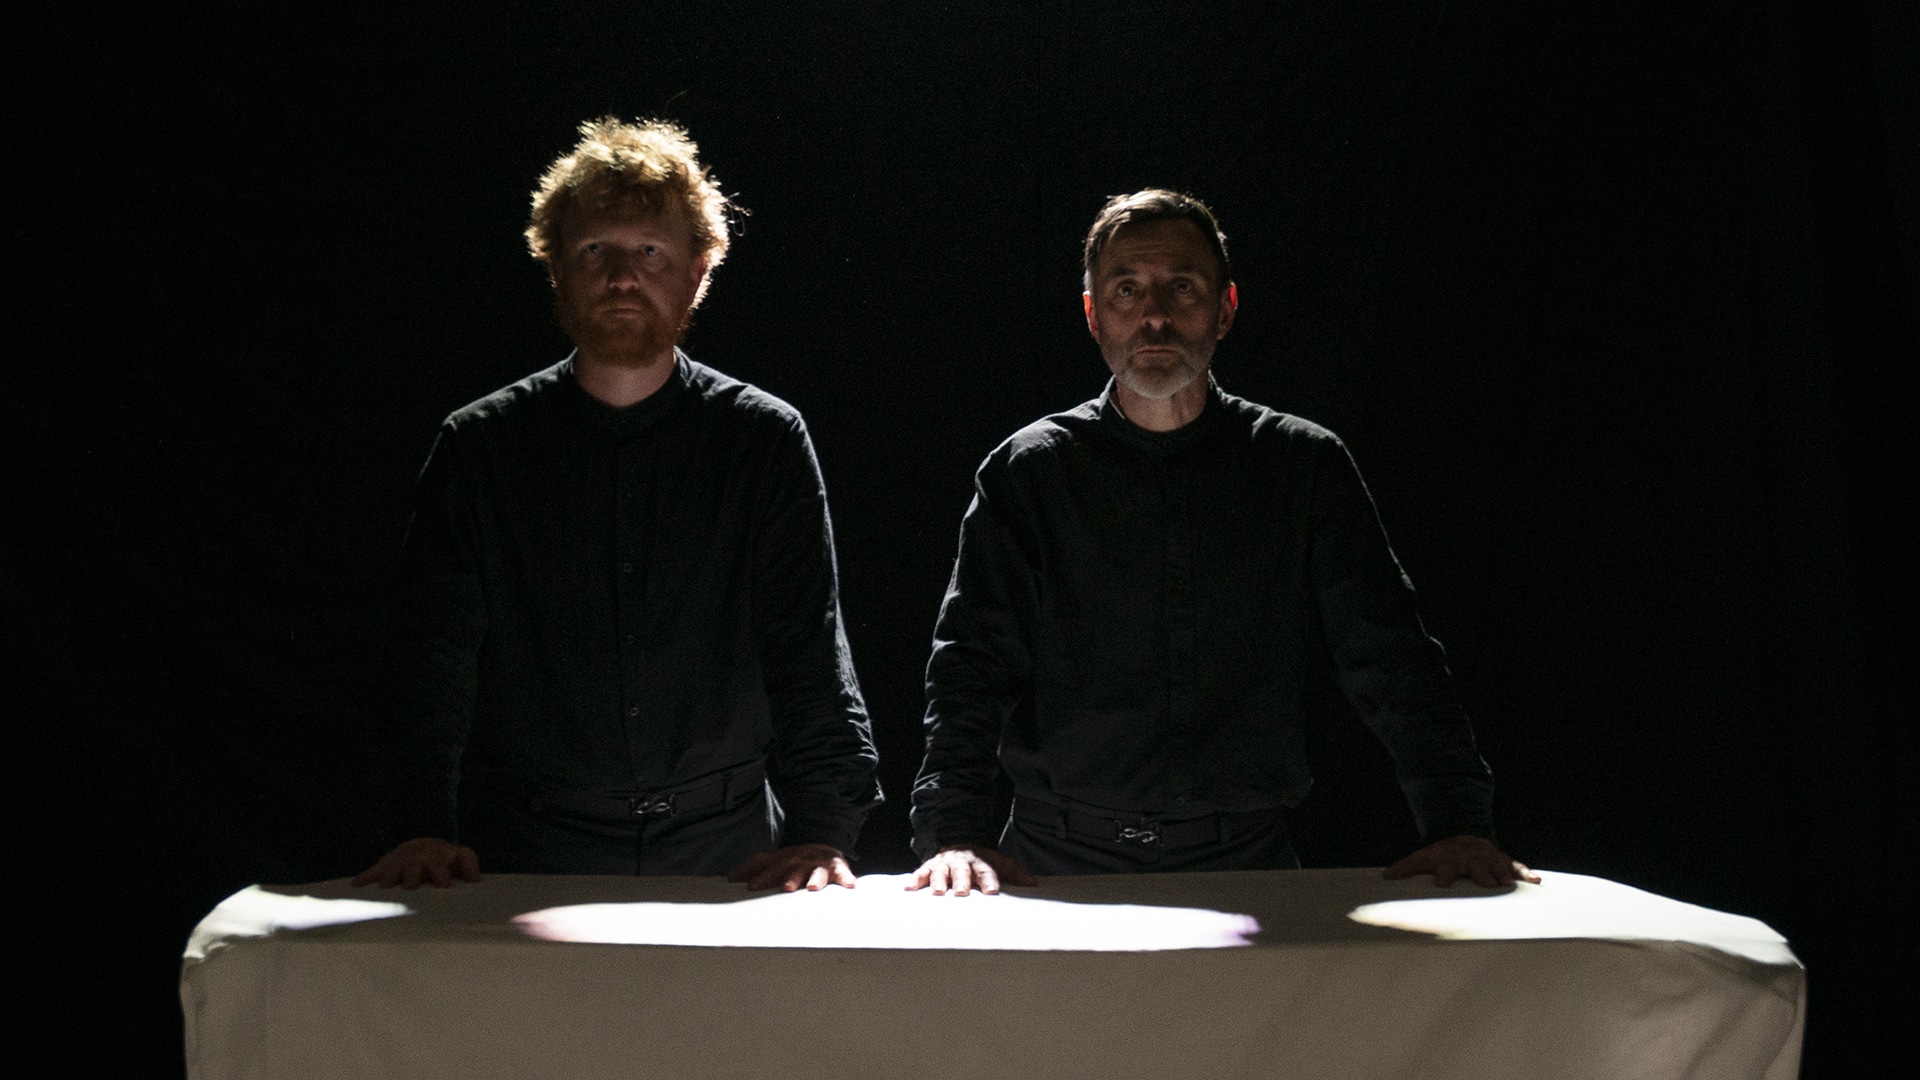 Dik Downey and Adam Blake stand behind a table, covered in a white tablecloth. They are cast in shadows, their hands pressed onto the tabletop